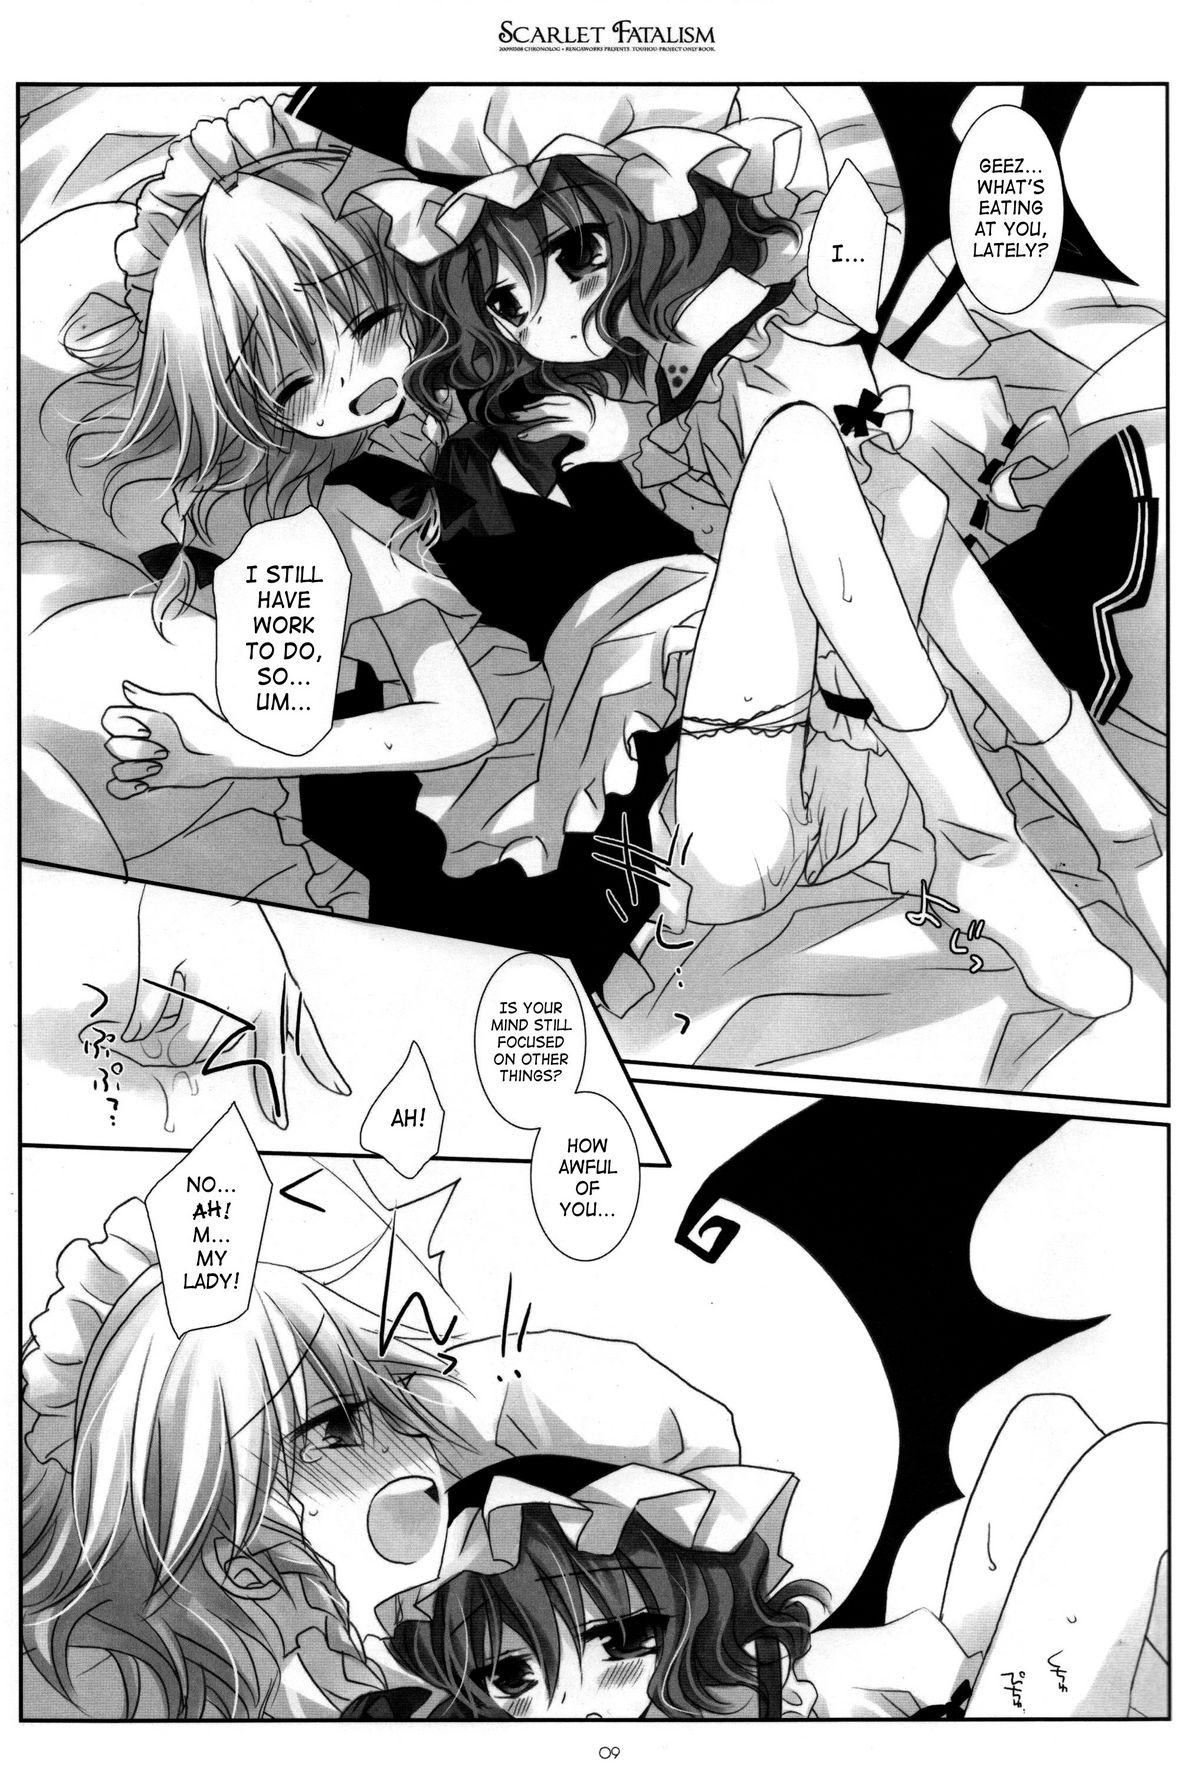 Moaning Scarlet Fatalism - Touhou project Sucks - Page 8